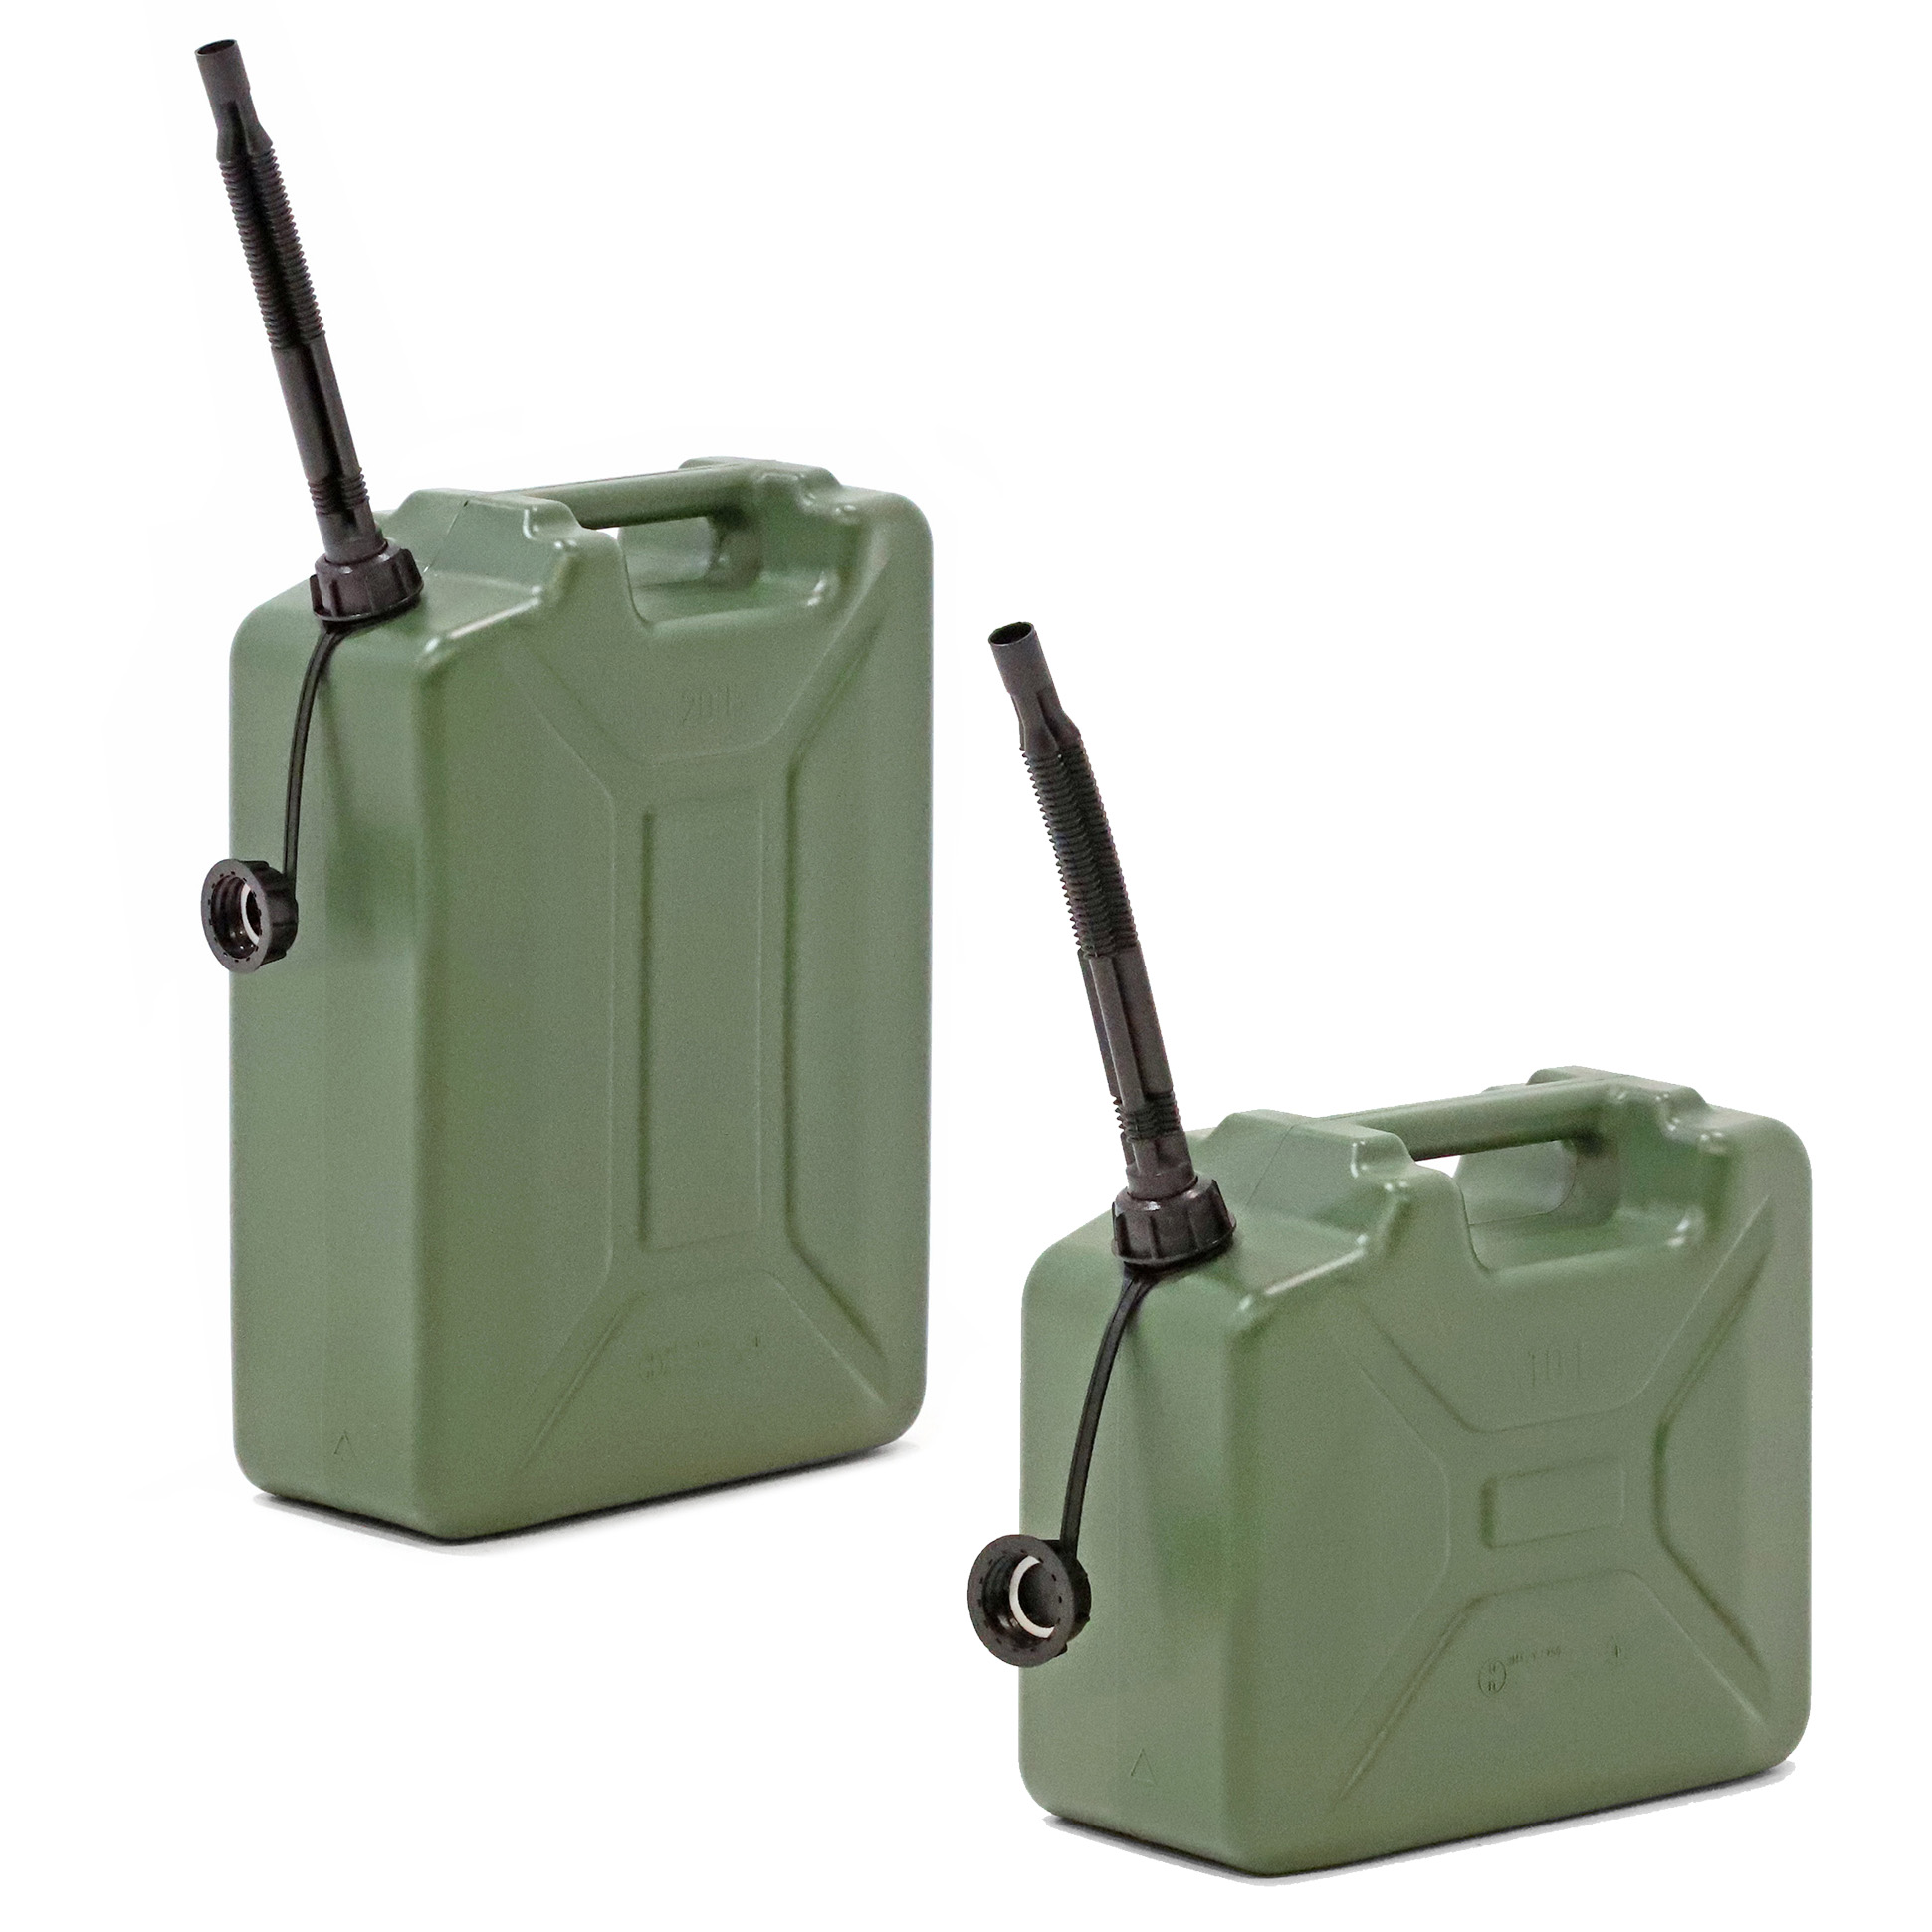 Fuel jerry cans in different sizes!